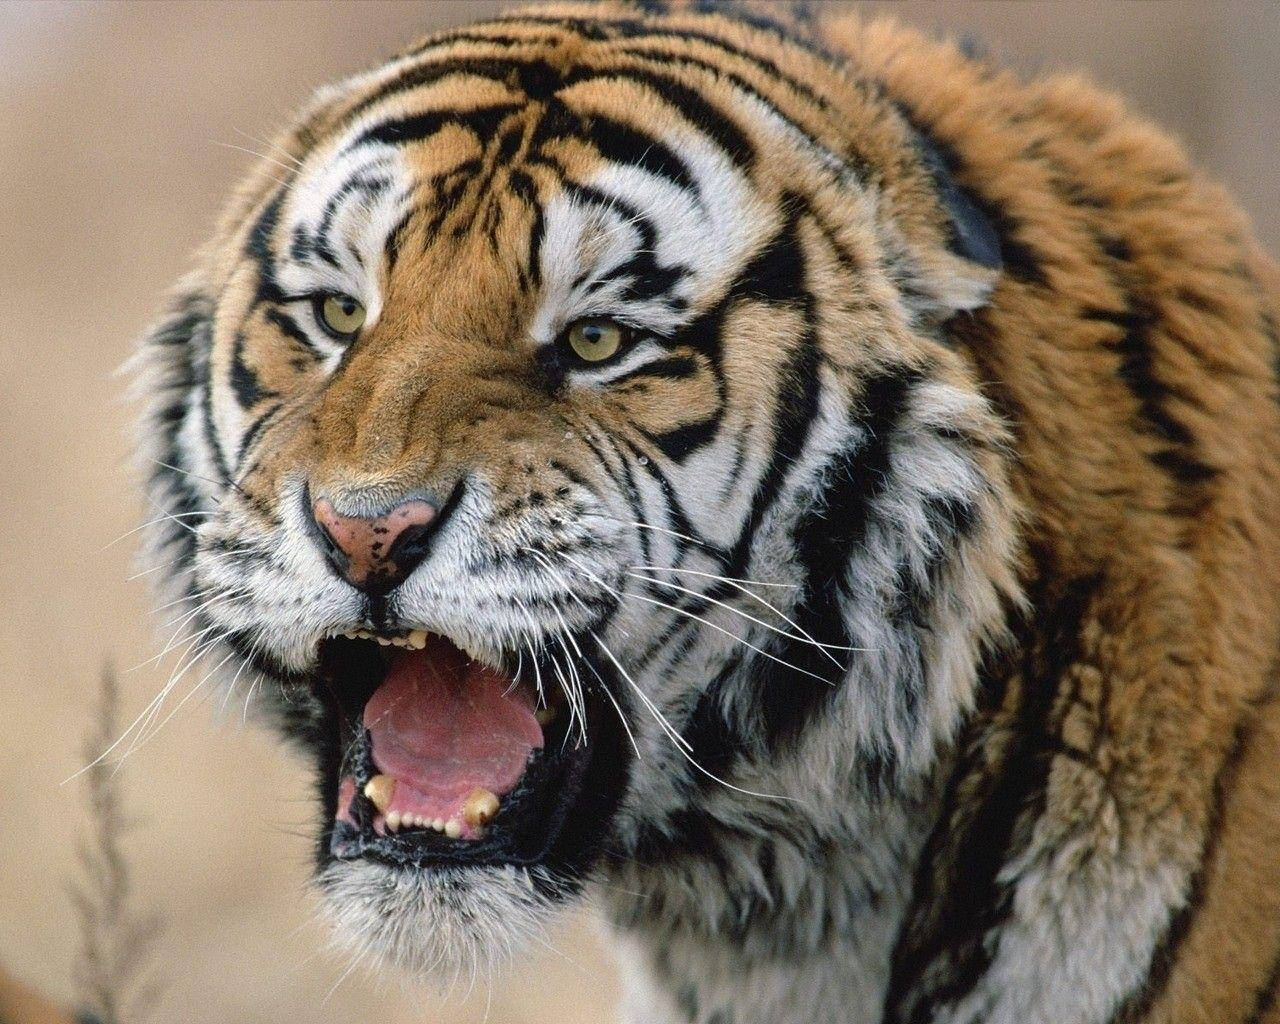 Growling Angry Tiger Picture